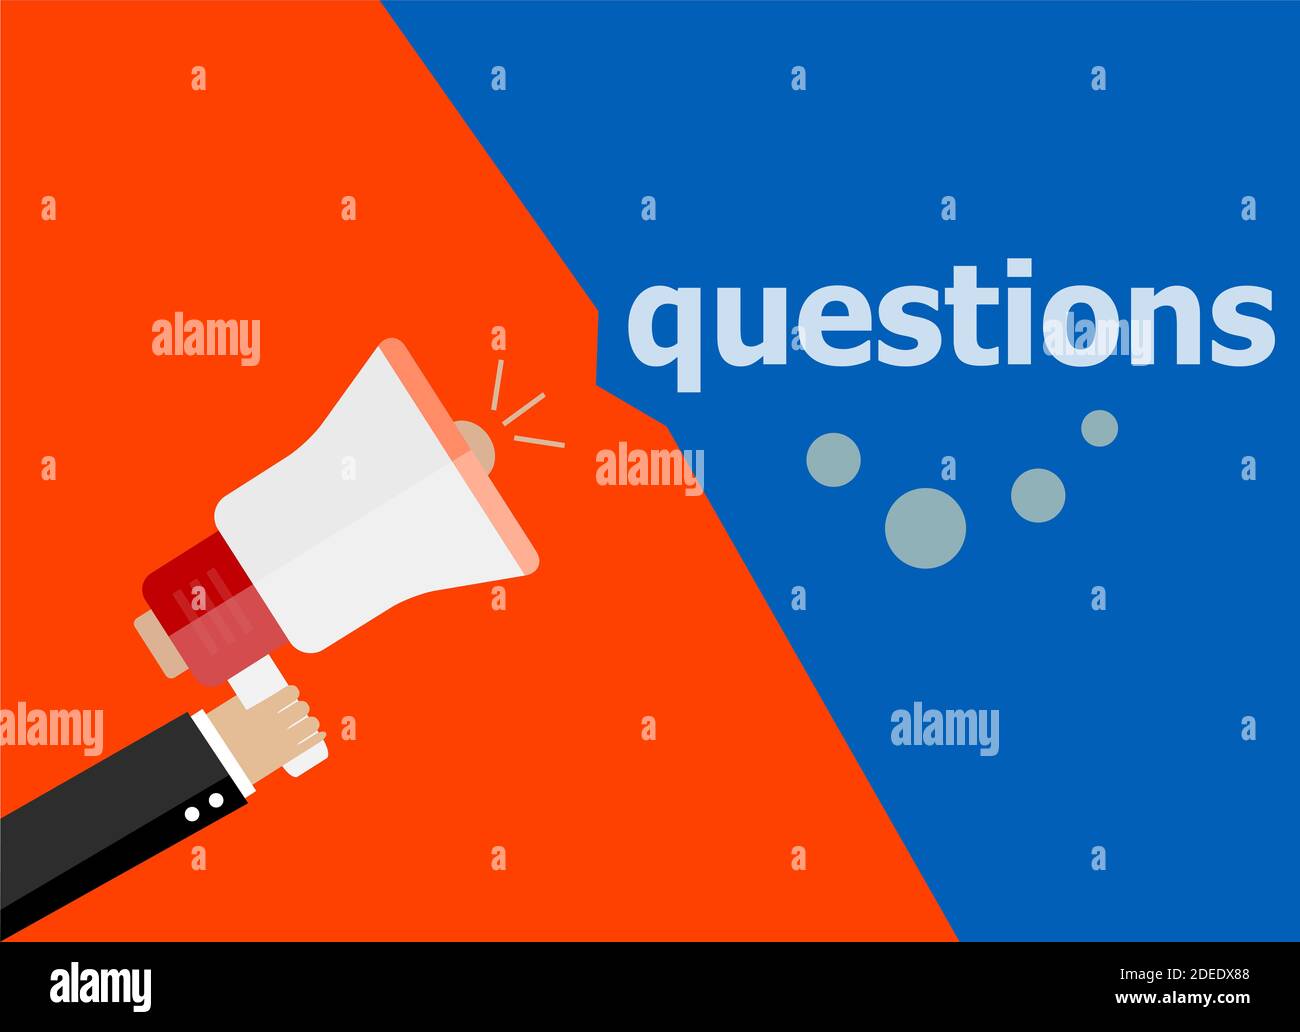 Questions. Hand holding megaphone and speech bubble. Flat design Stock Photo